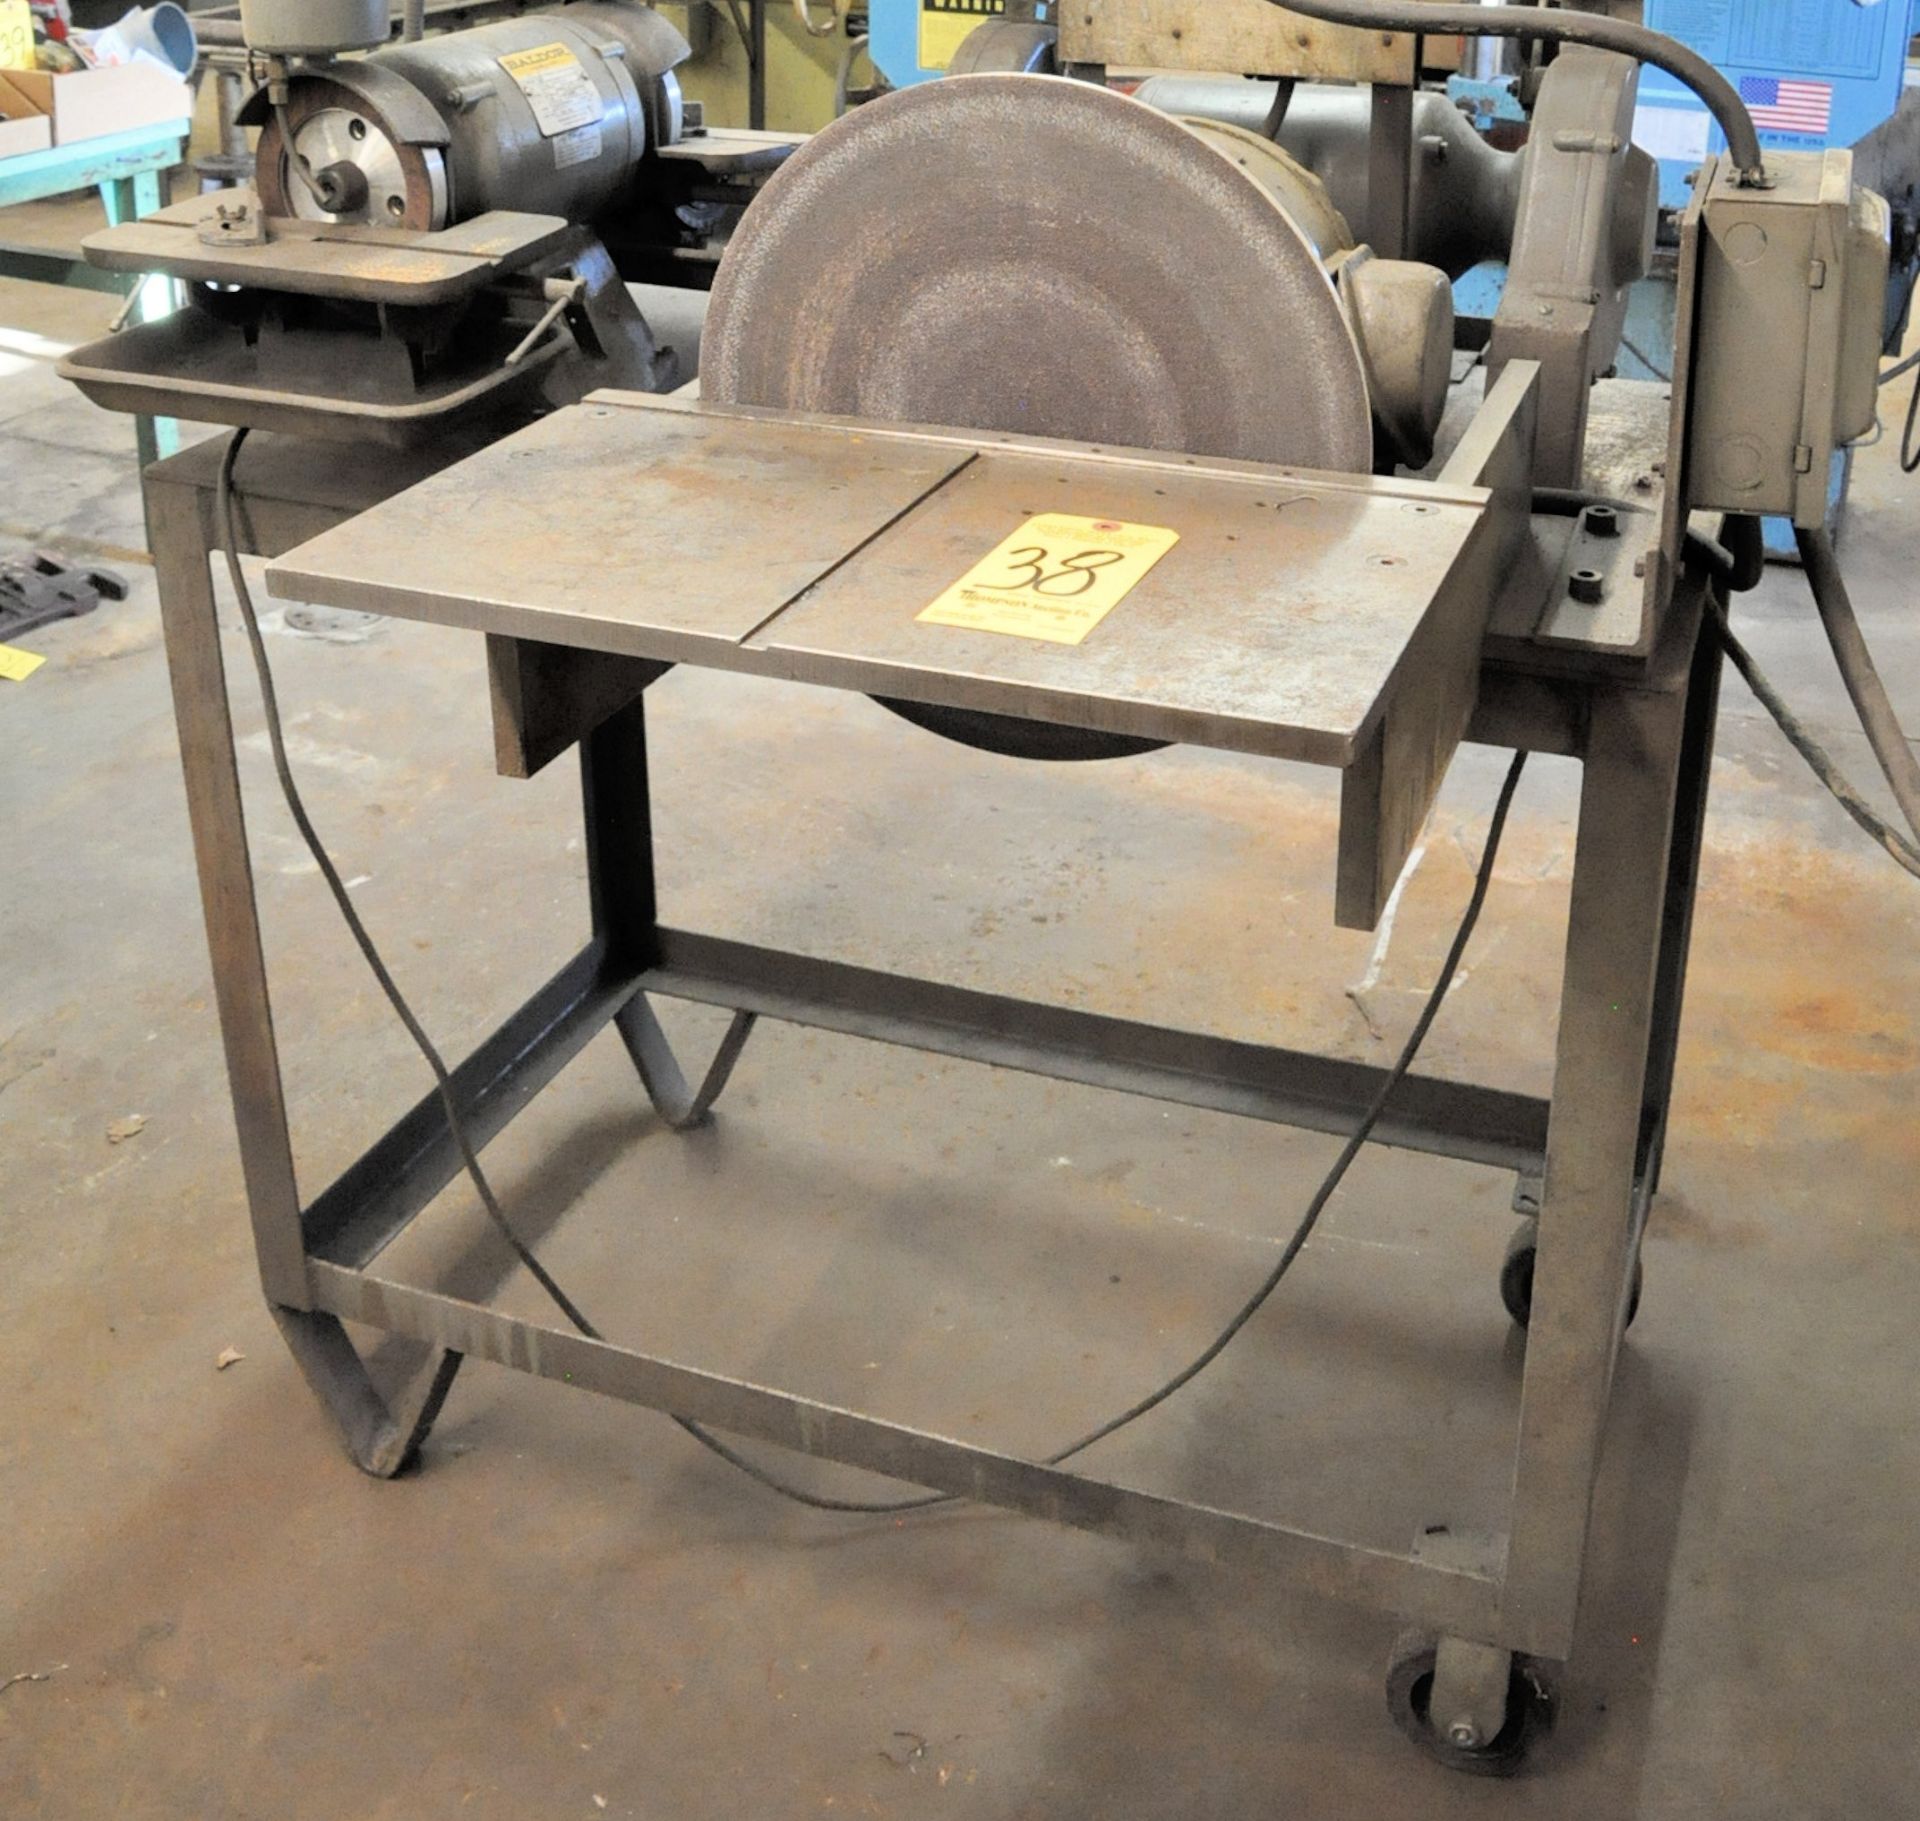 Westinghouse 15" Vertical Disc Sander, 1 HP, 3 Phase, 440 Volt, with Steel Stand - Image 2 of 2